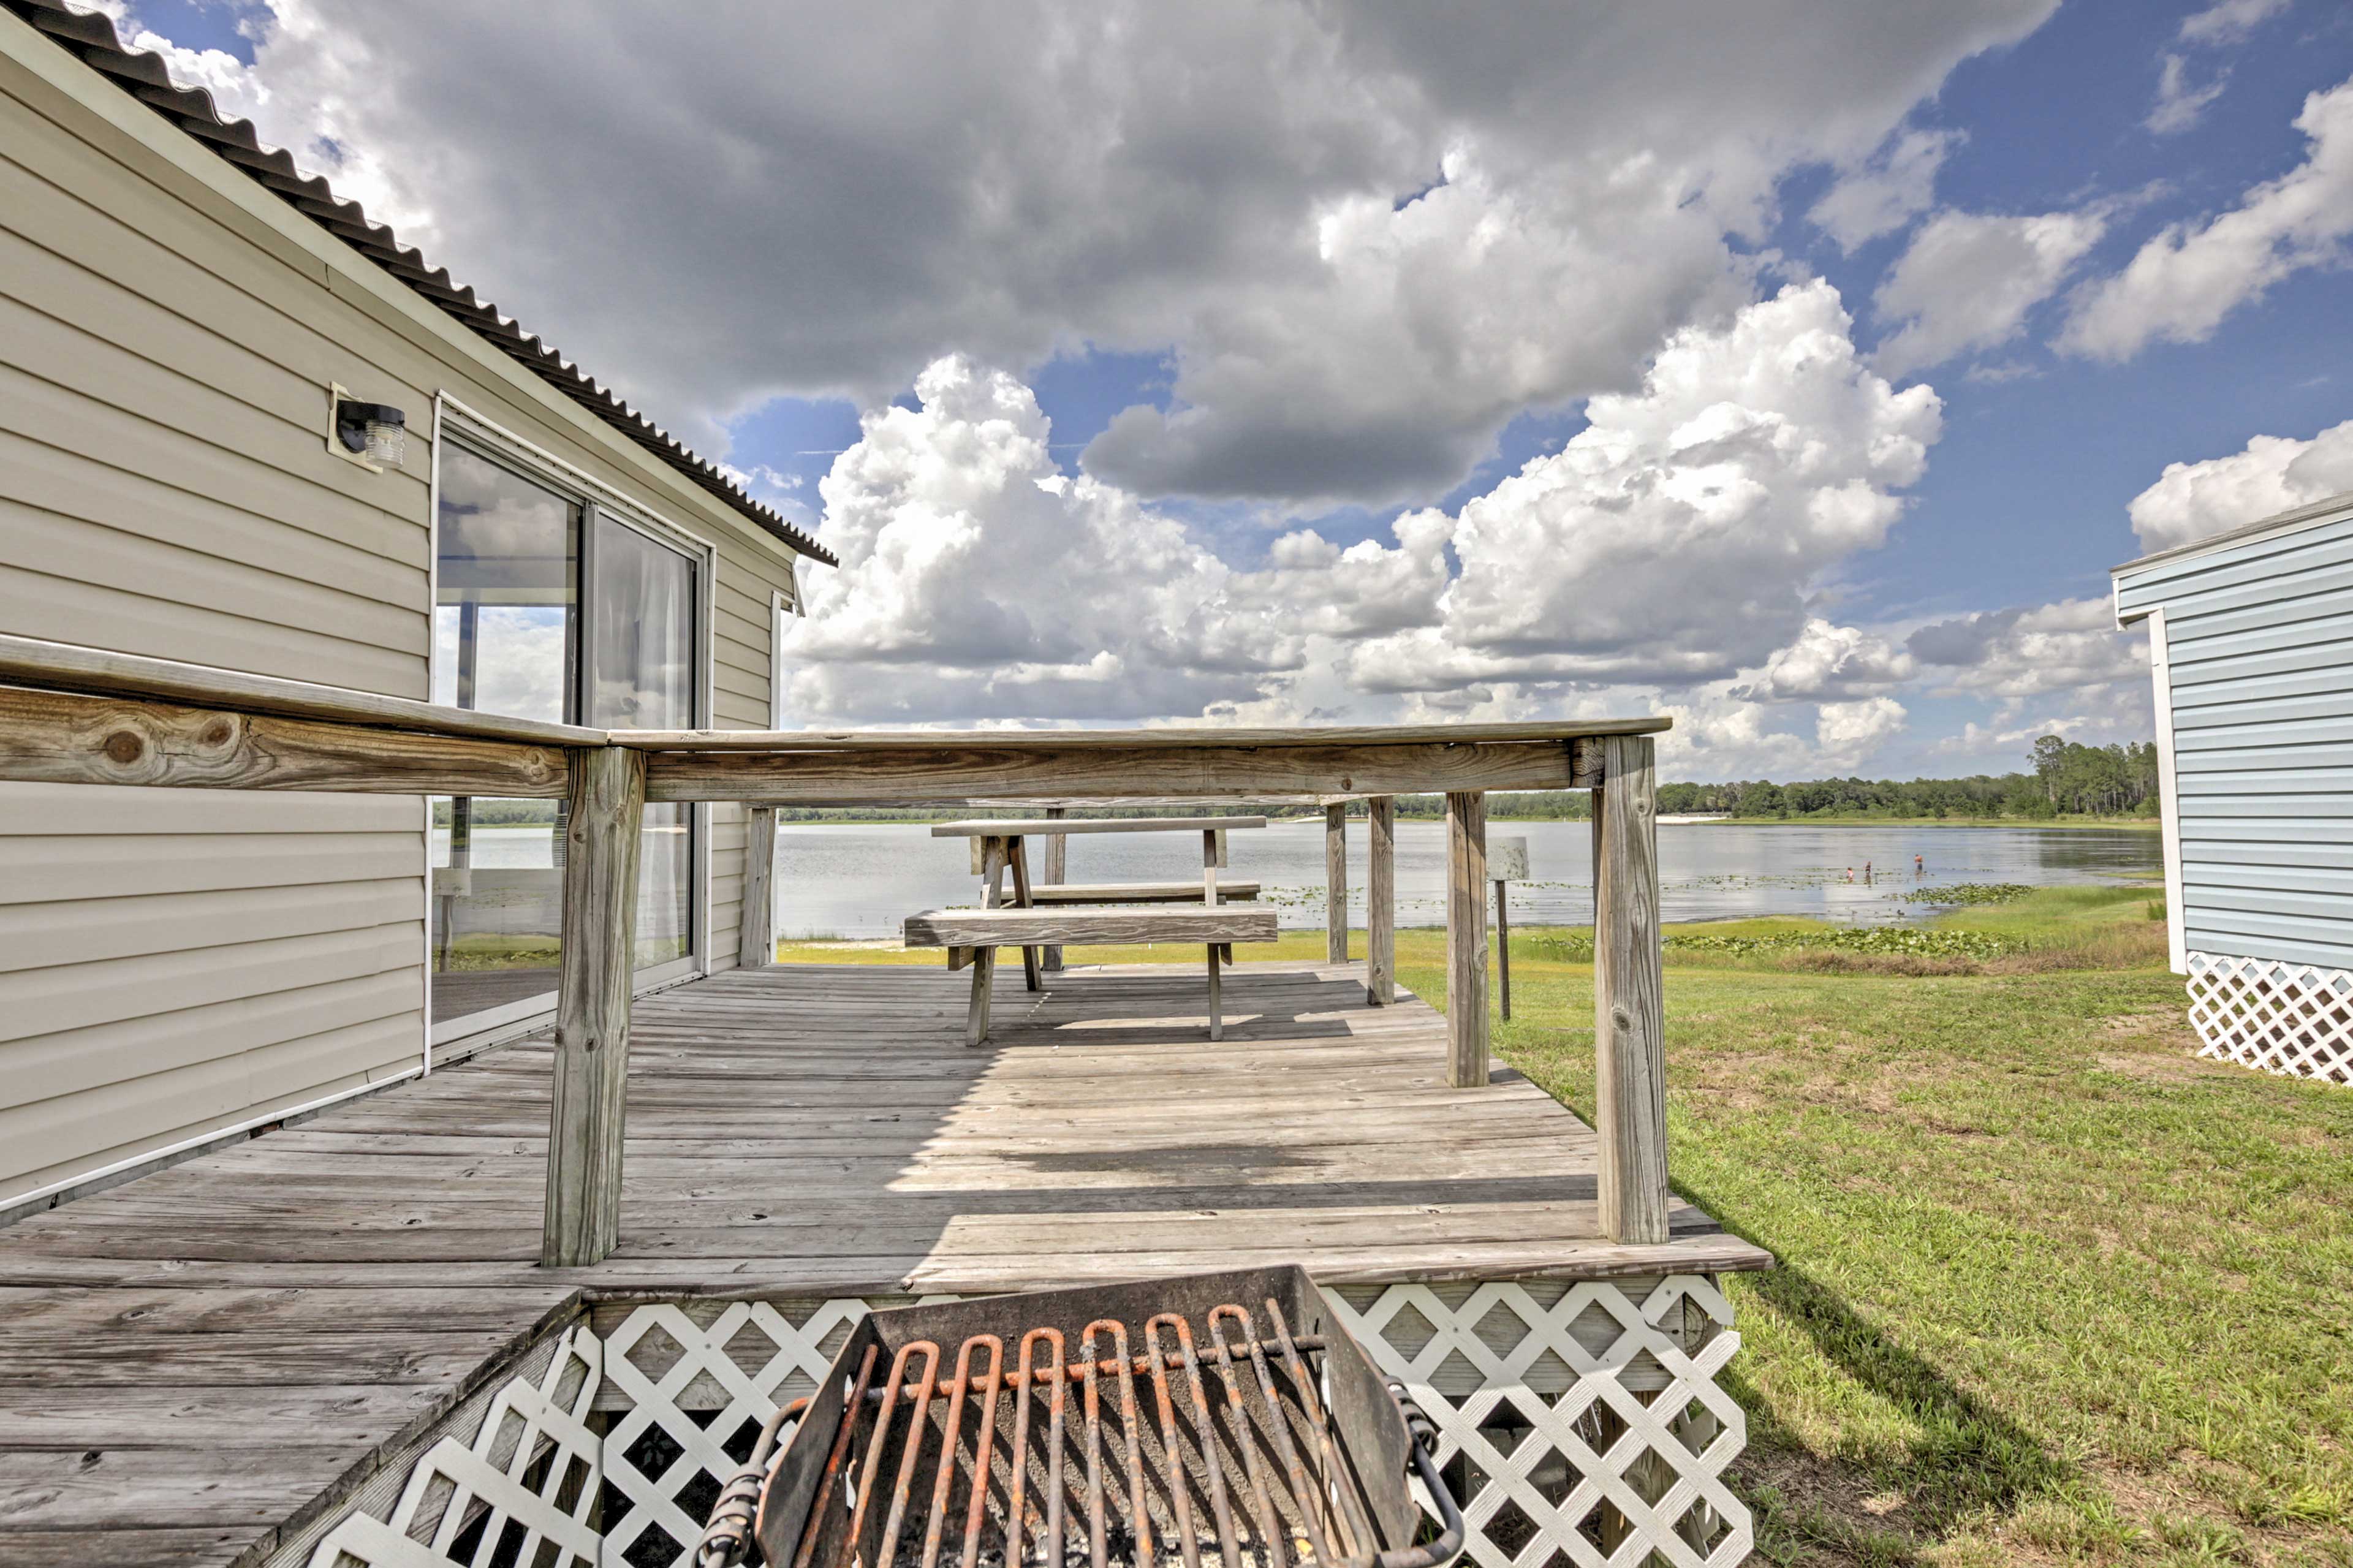 All your worries from the real world will be washed away at this lakeside home.